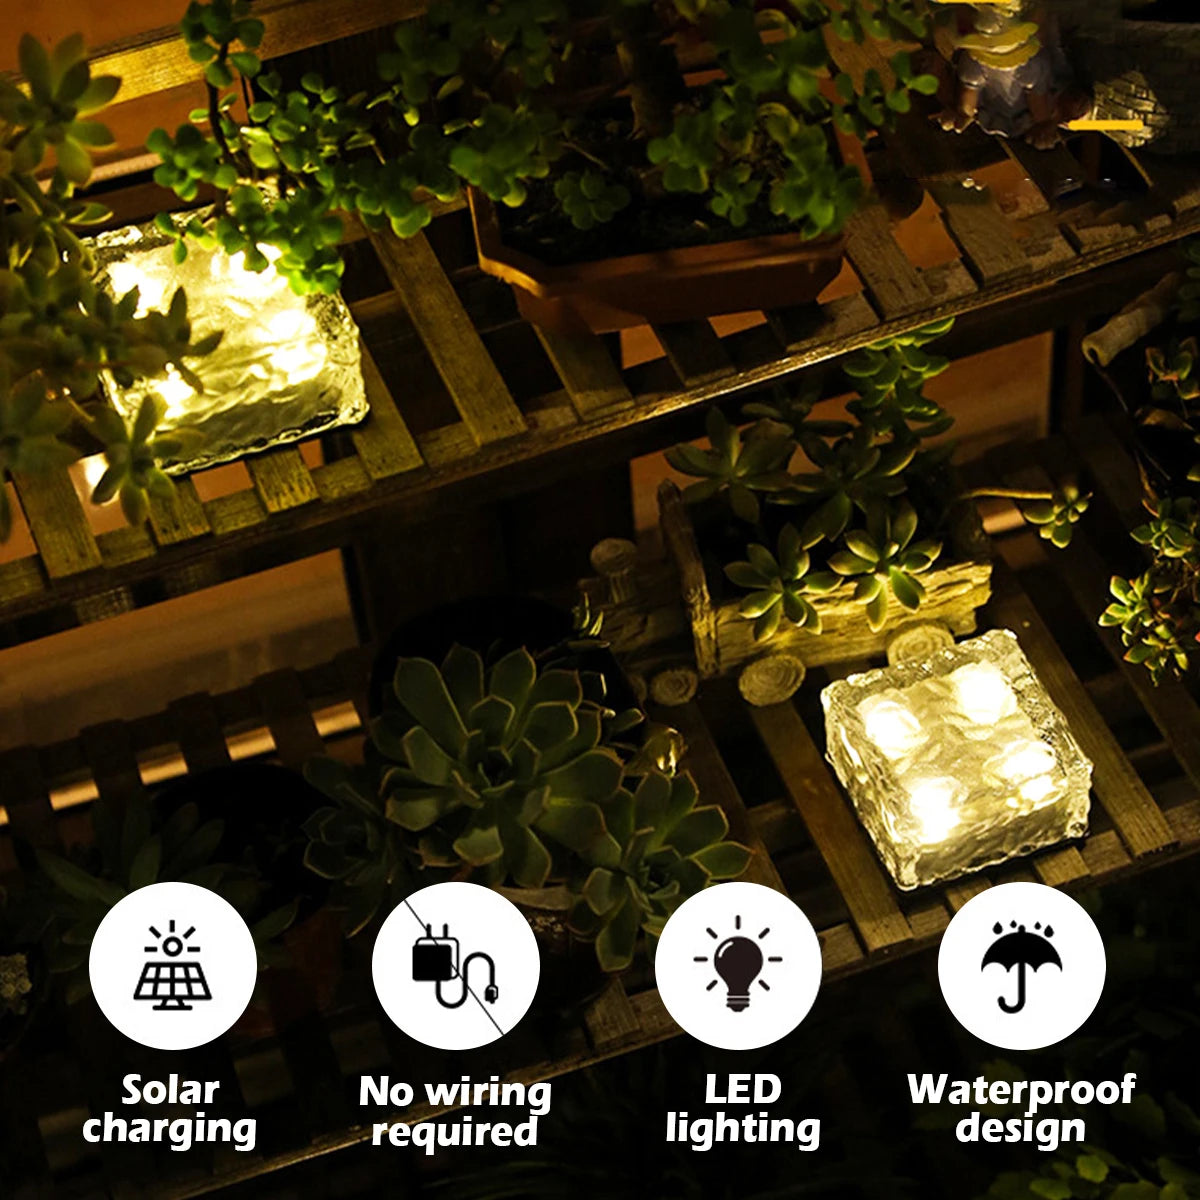 4pcs Solar LED Light, Energy-efficient solar-powered LED lights with waterproof design; no wiring or charging needed.